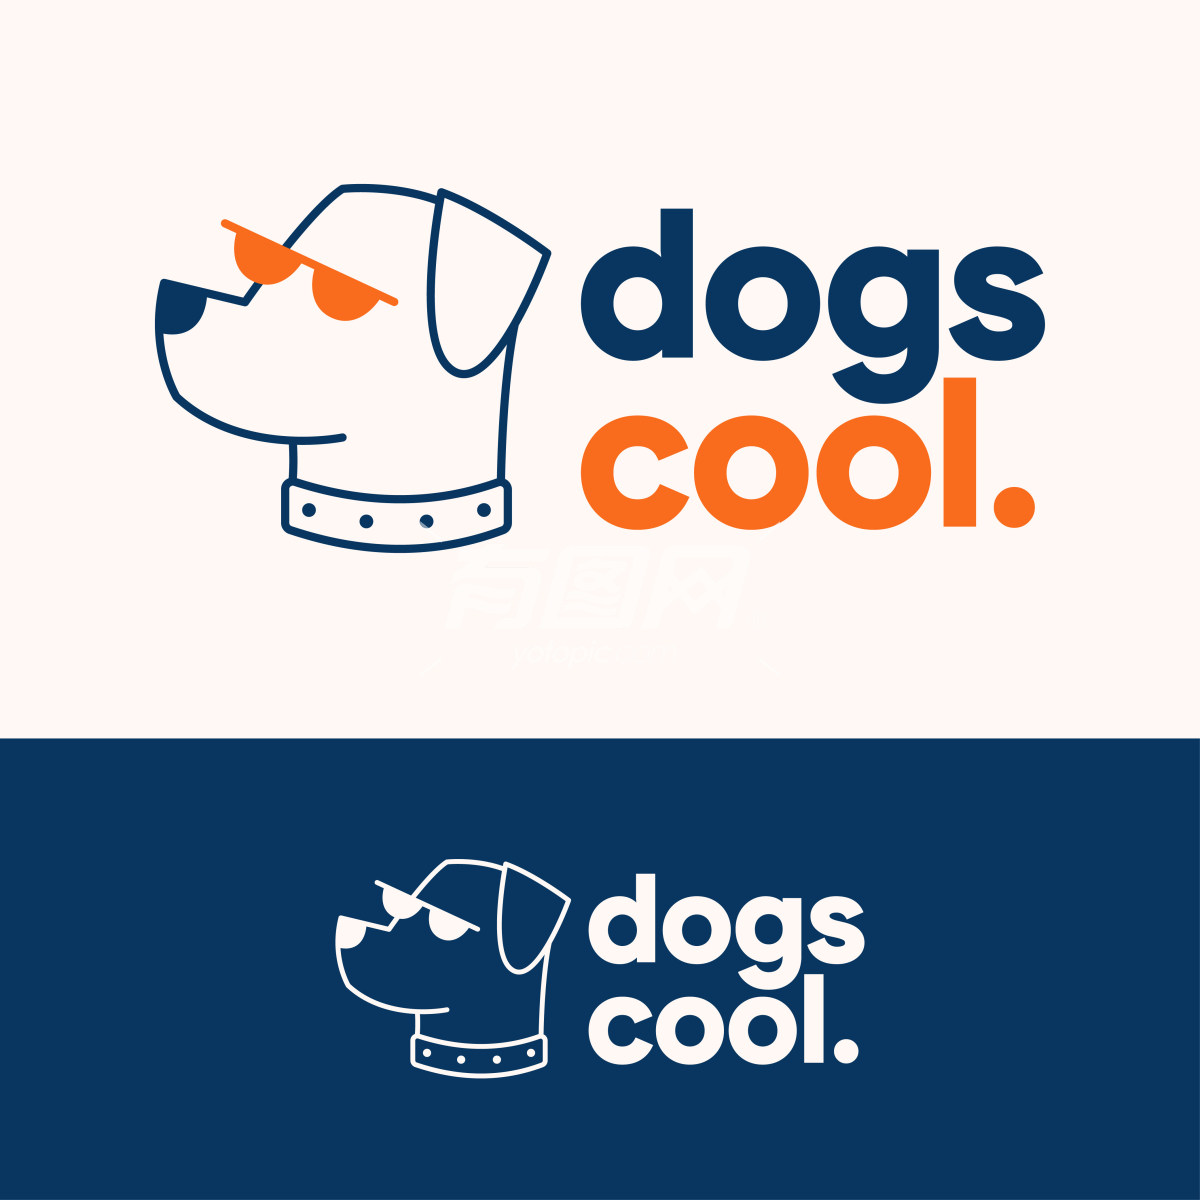 Dogs Cool 标志设计